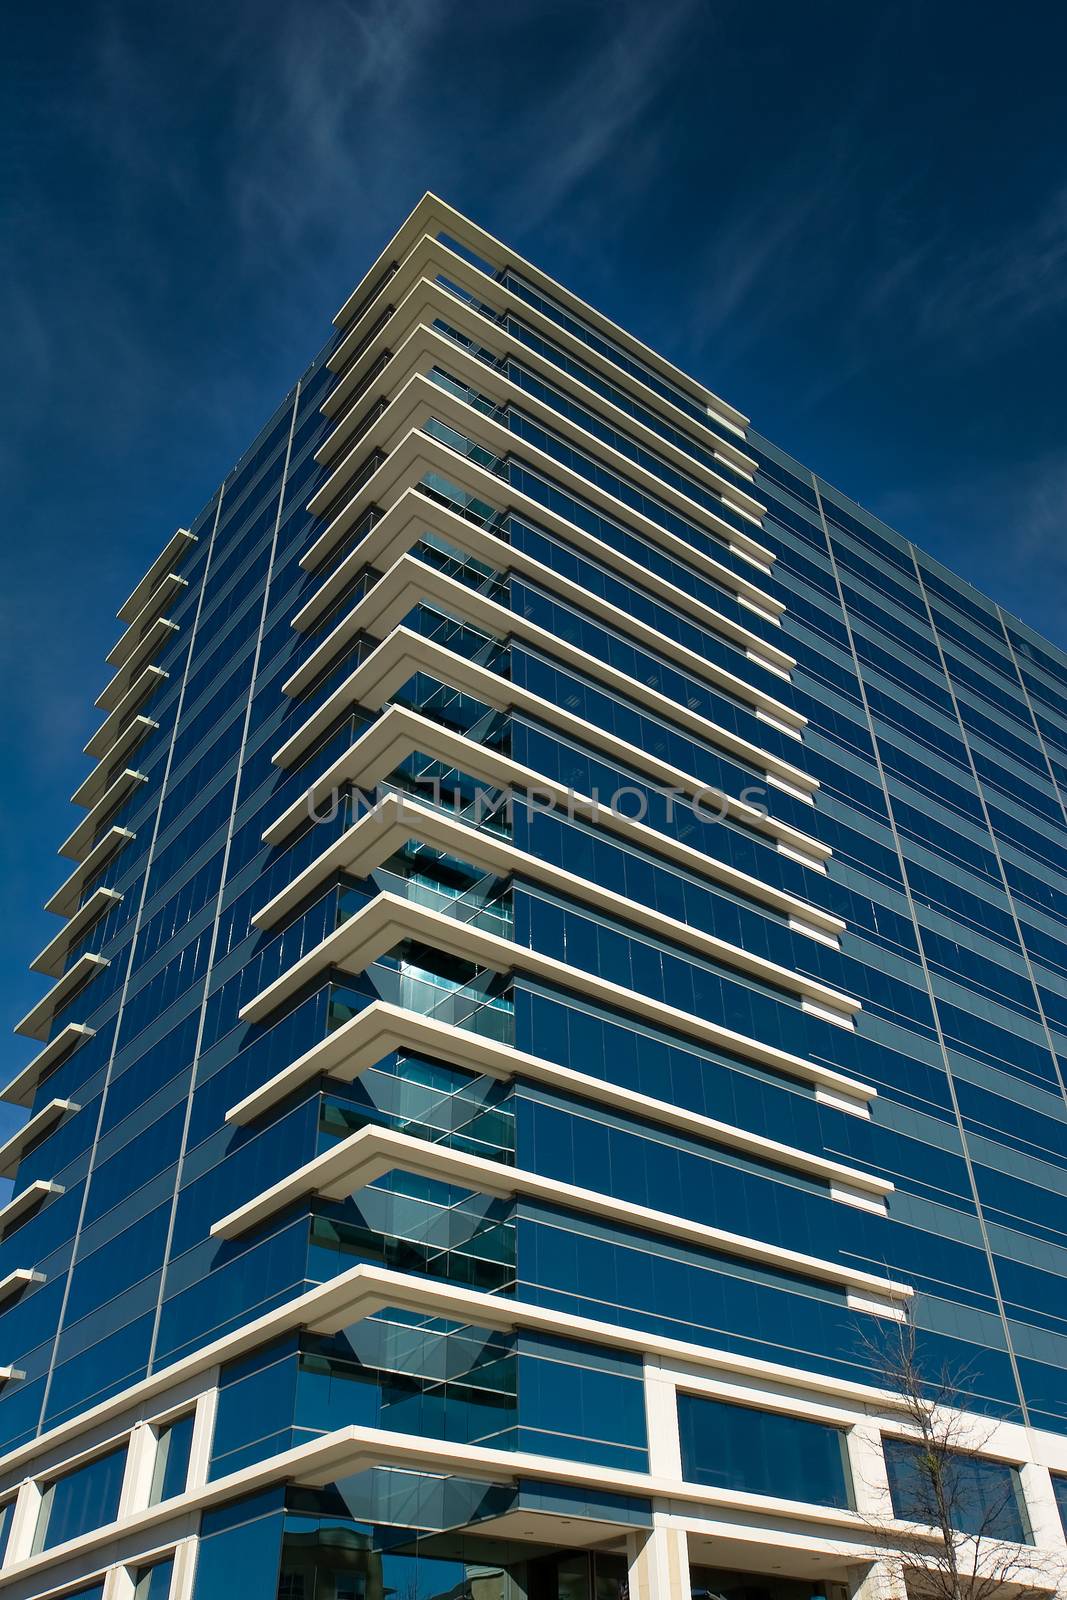 A blue glass office building with white corners